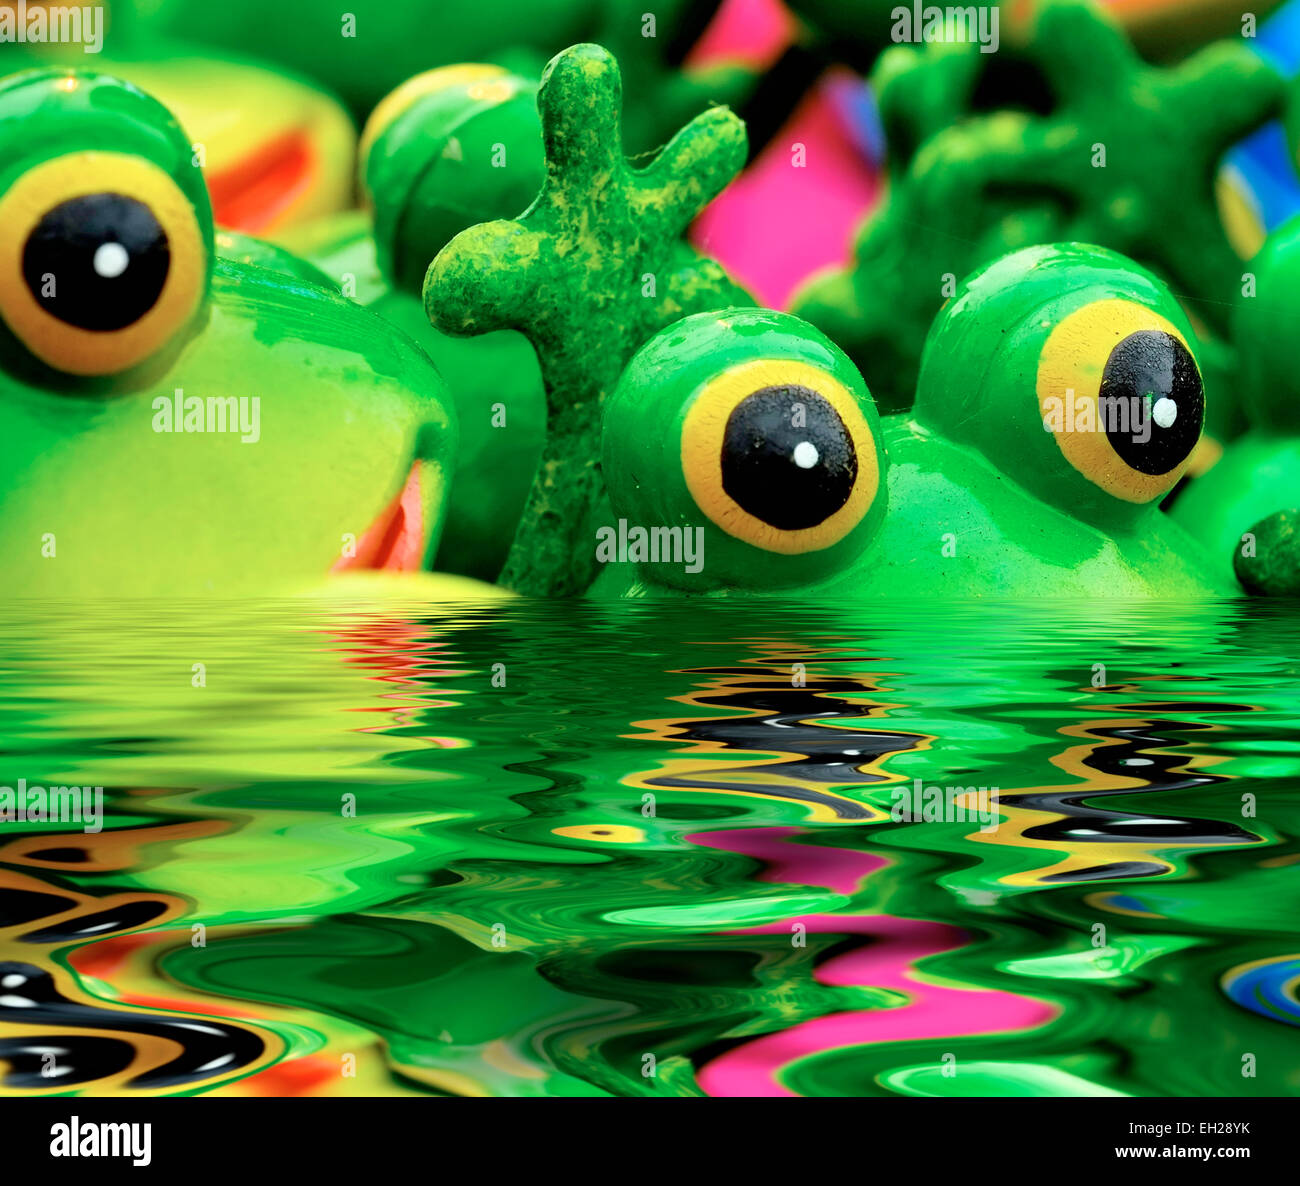 A group of ceramic frogs in a digitally created pool of water Stock Photo